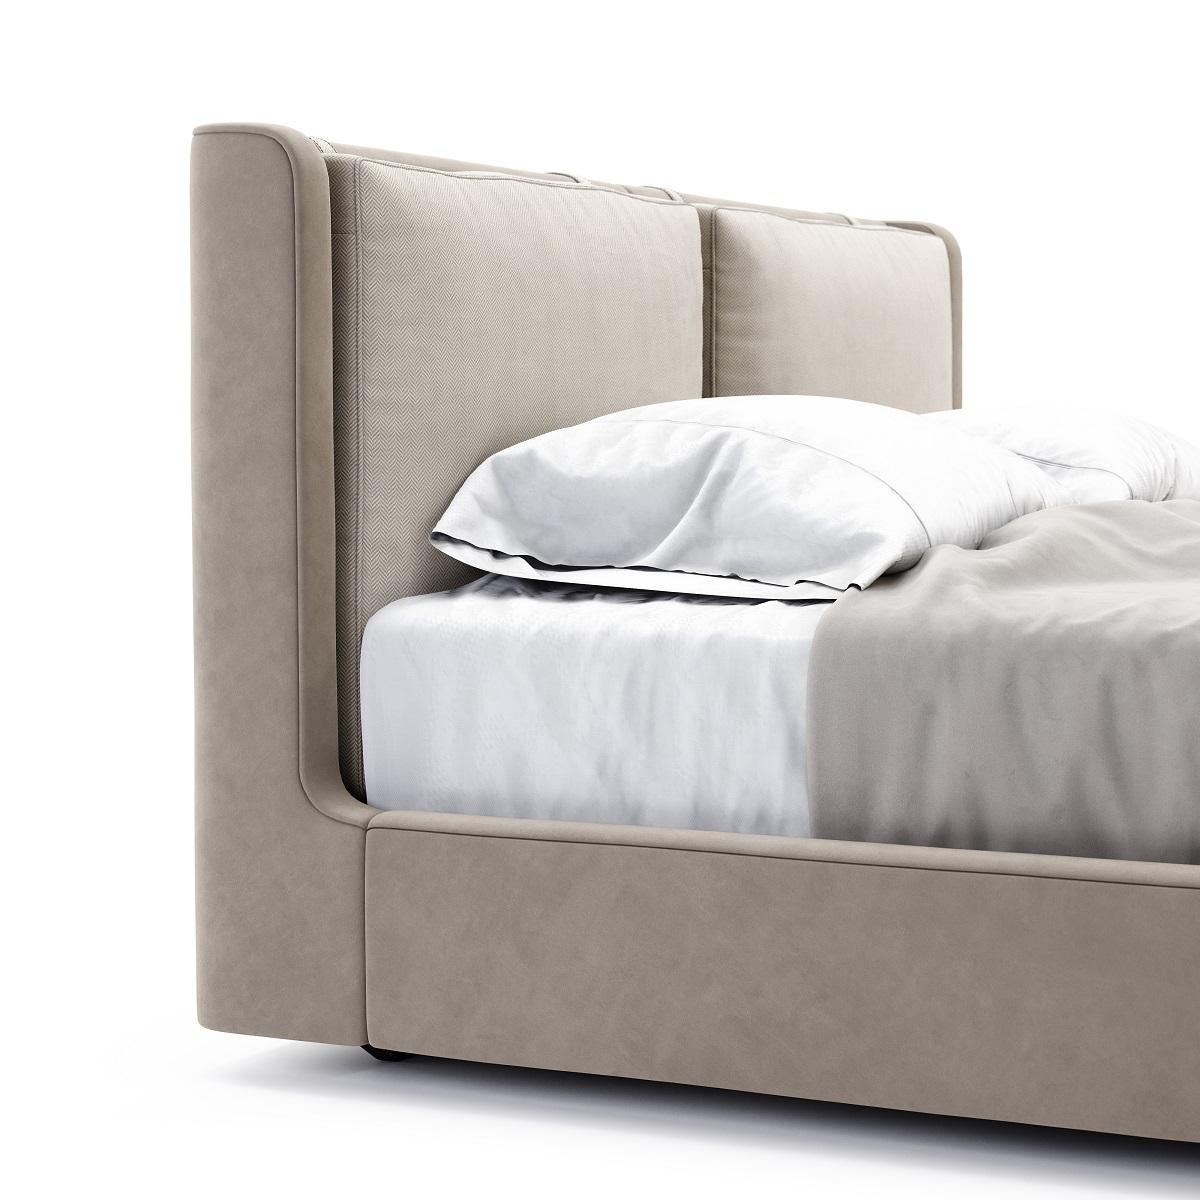 american queen size bed dimensions